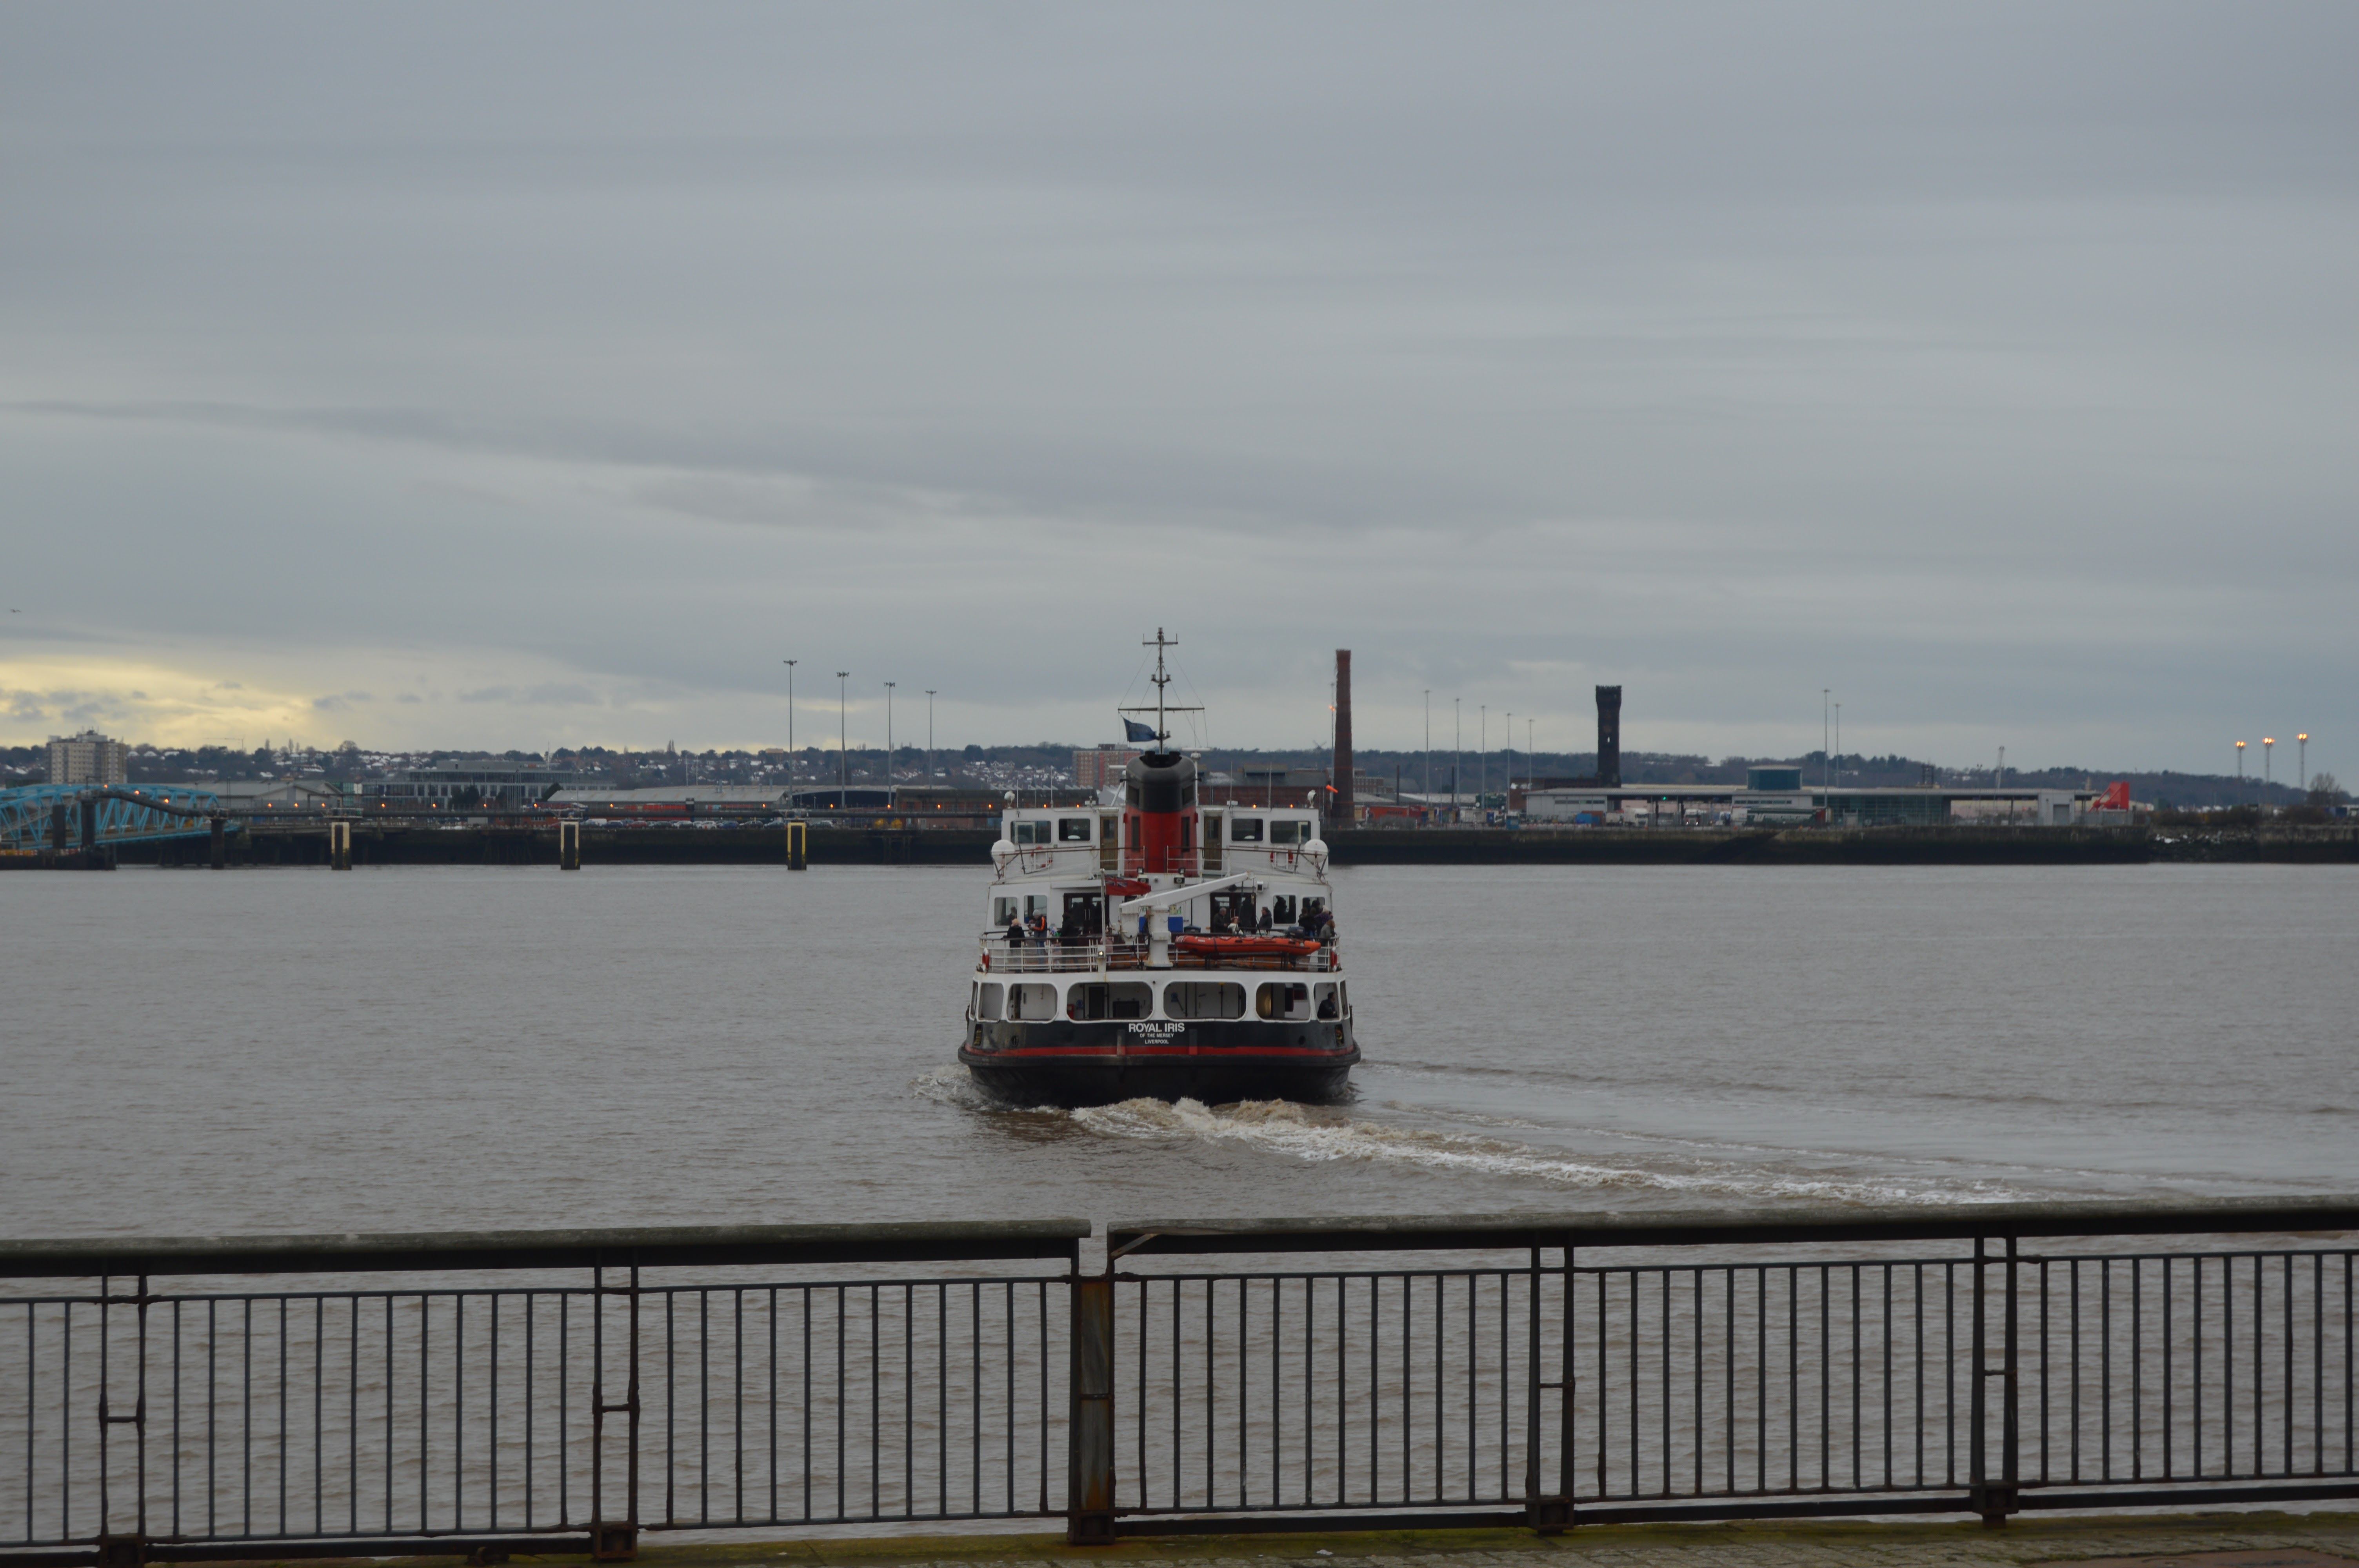 Ferry on the River Mersey